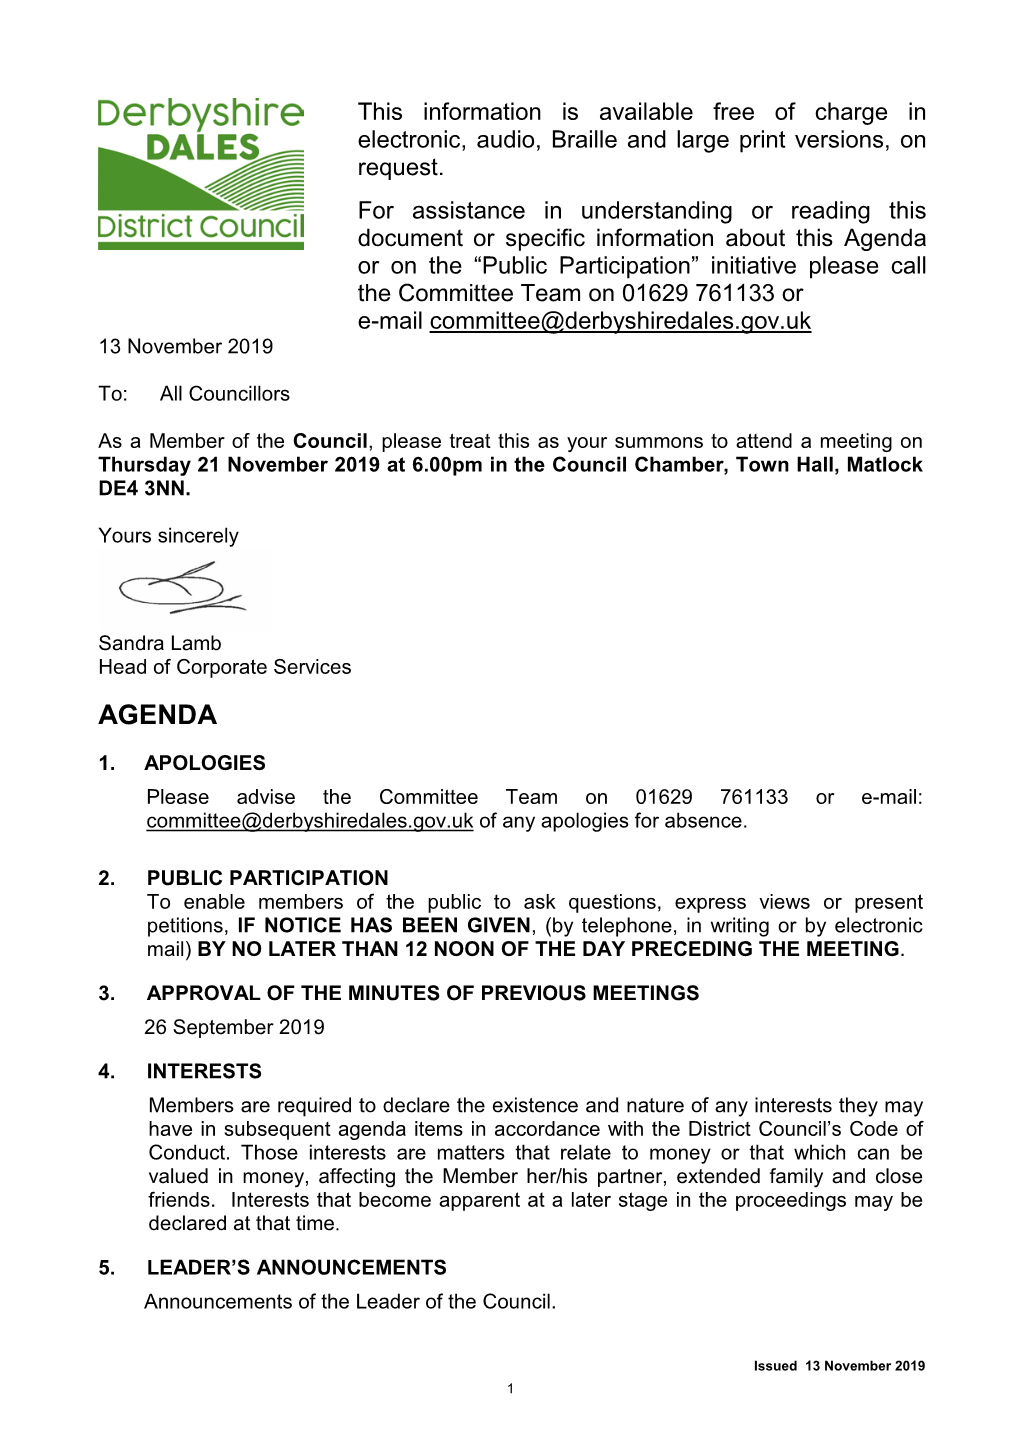 Agenda Or on the “Public Participation” Initiative Please Call the Committee Team on 01629 761133 Or E-Mail Committee@Derbyshiredales.Gov.Uk 13 November 2019